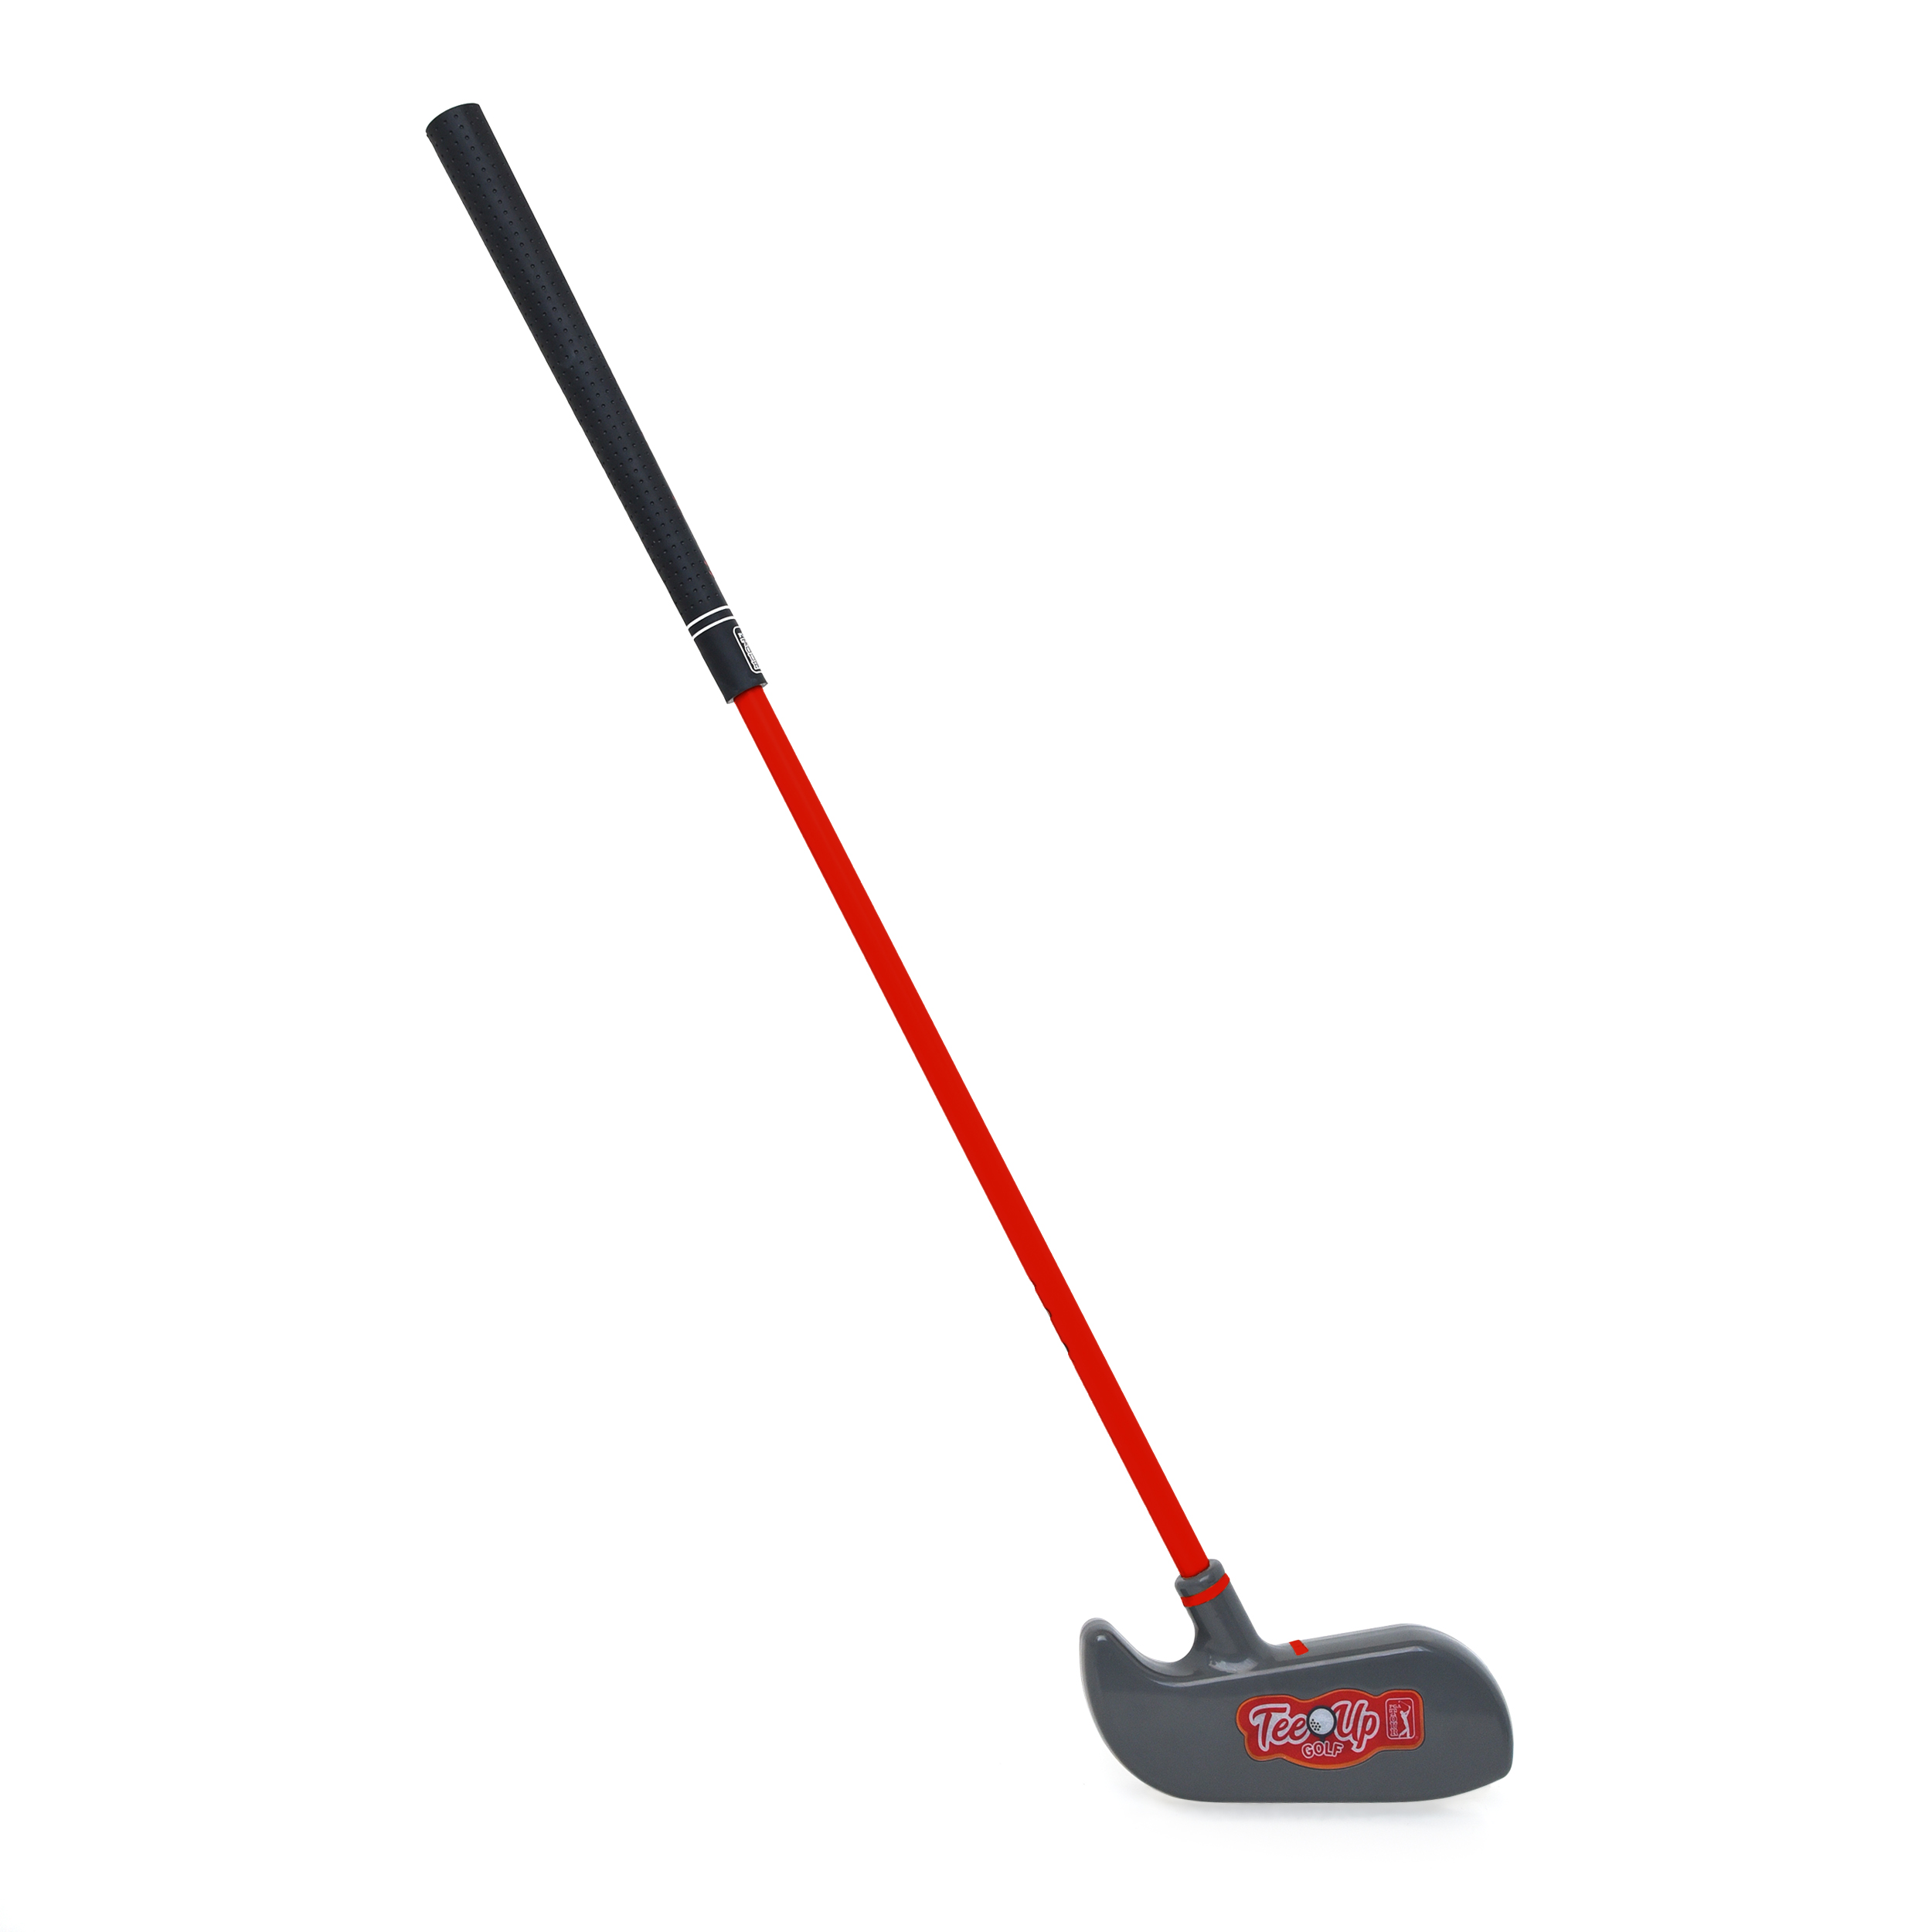 PGA Tour Tee-Up Kids Putter Golf Club, Small, Right Handed Dexterity - image 2 of 7